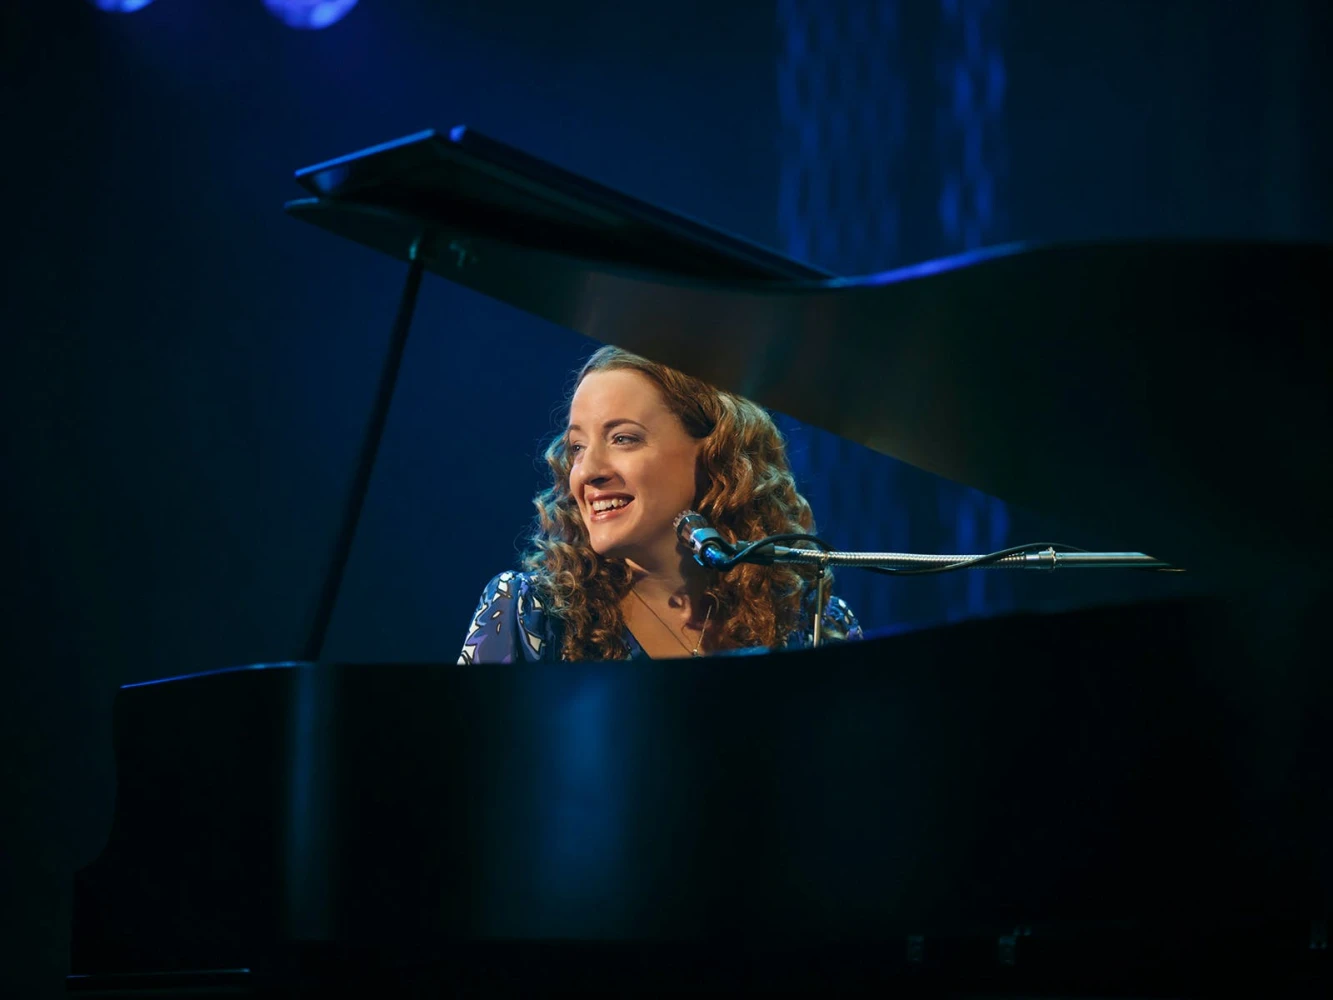 Beautiful: The Carole King Musical: What to expect - 4